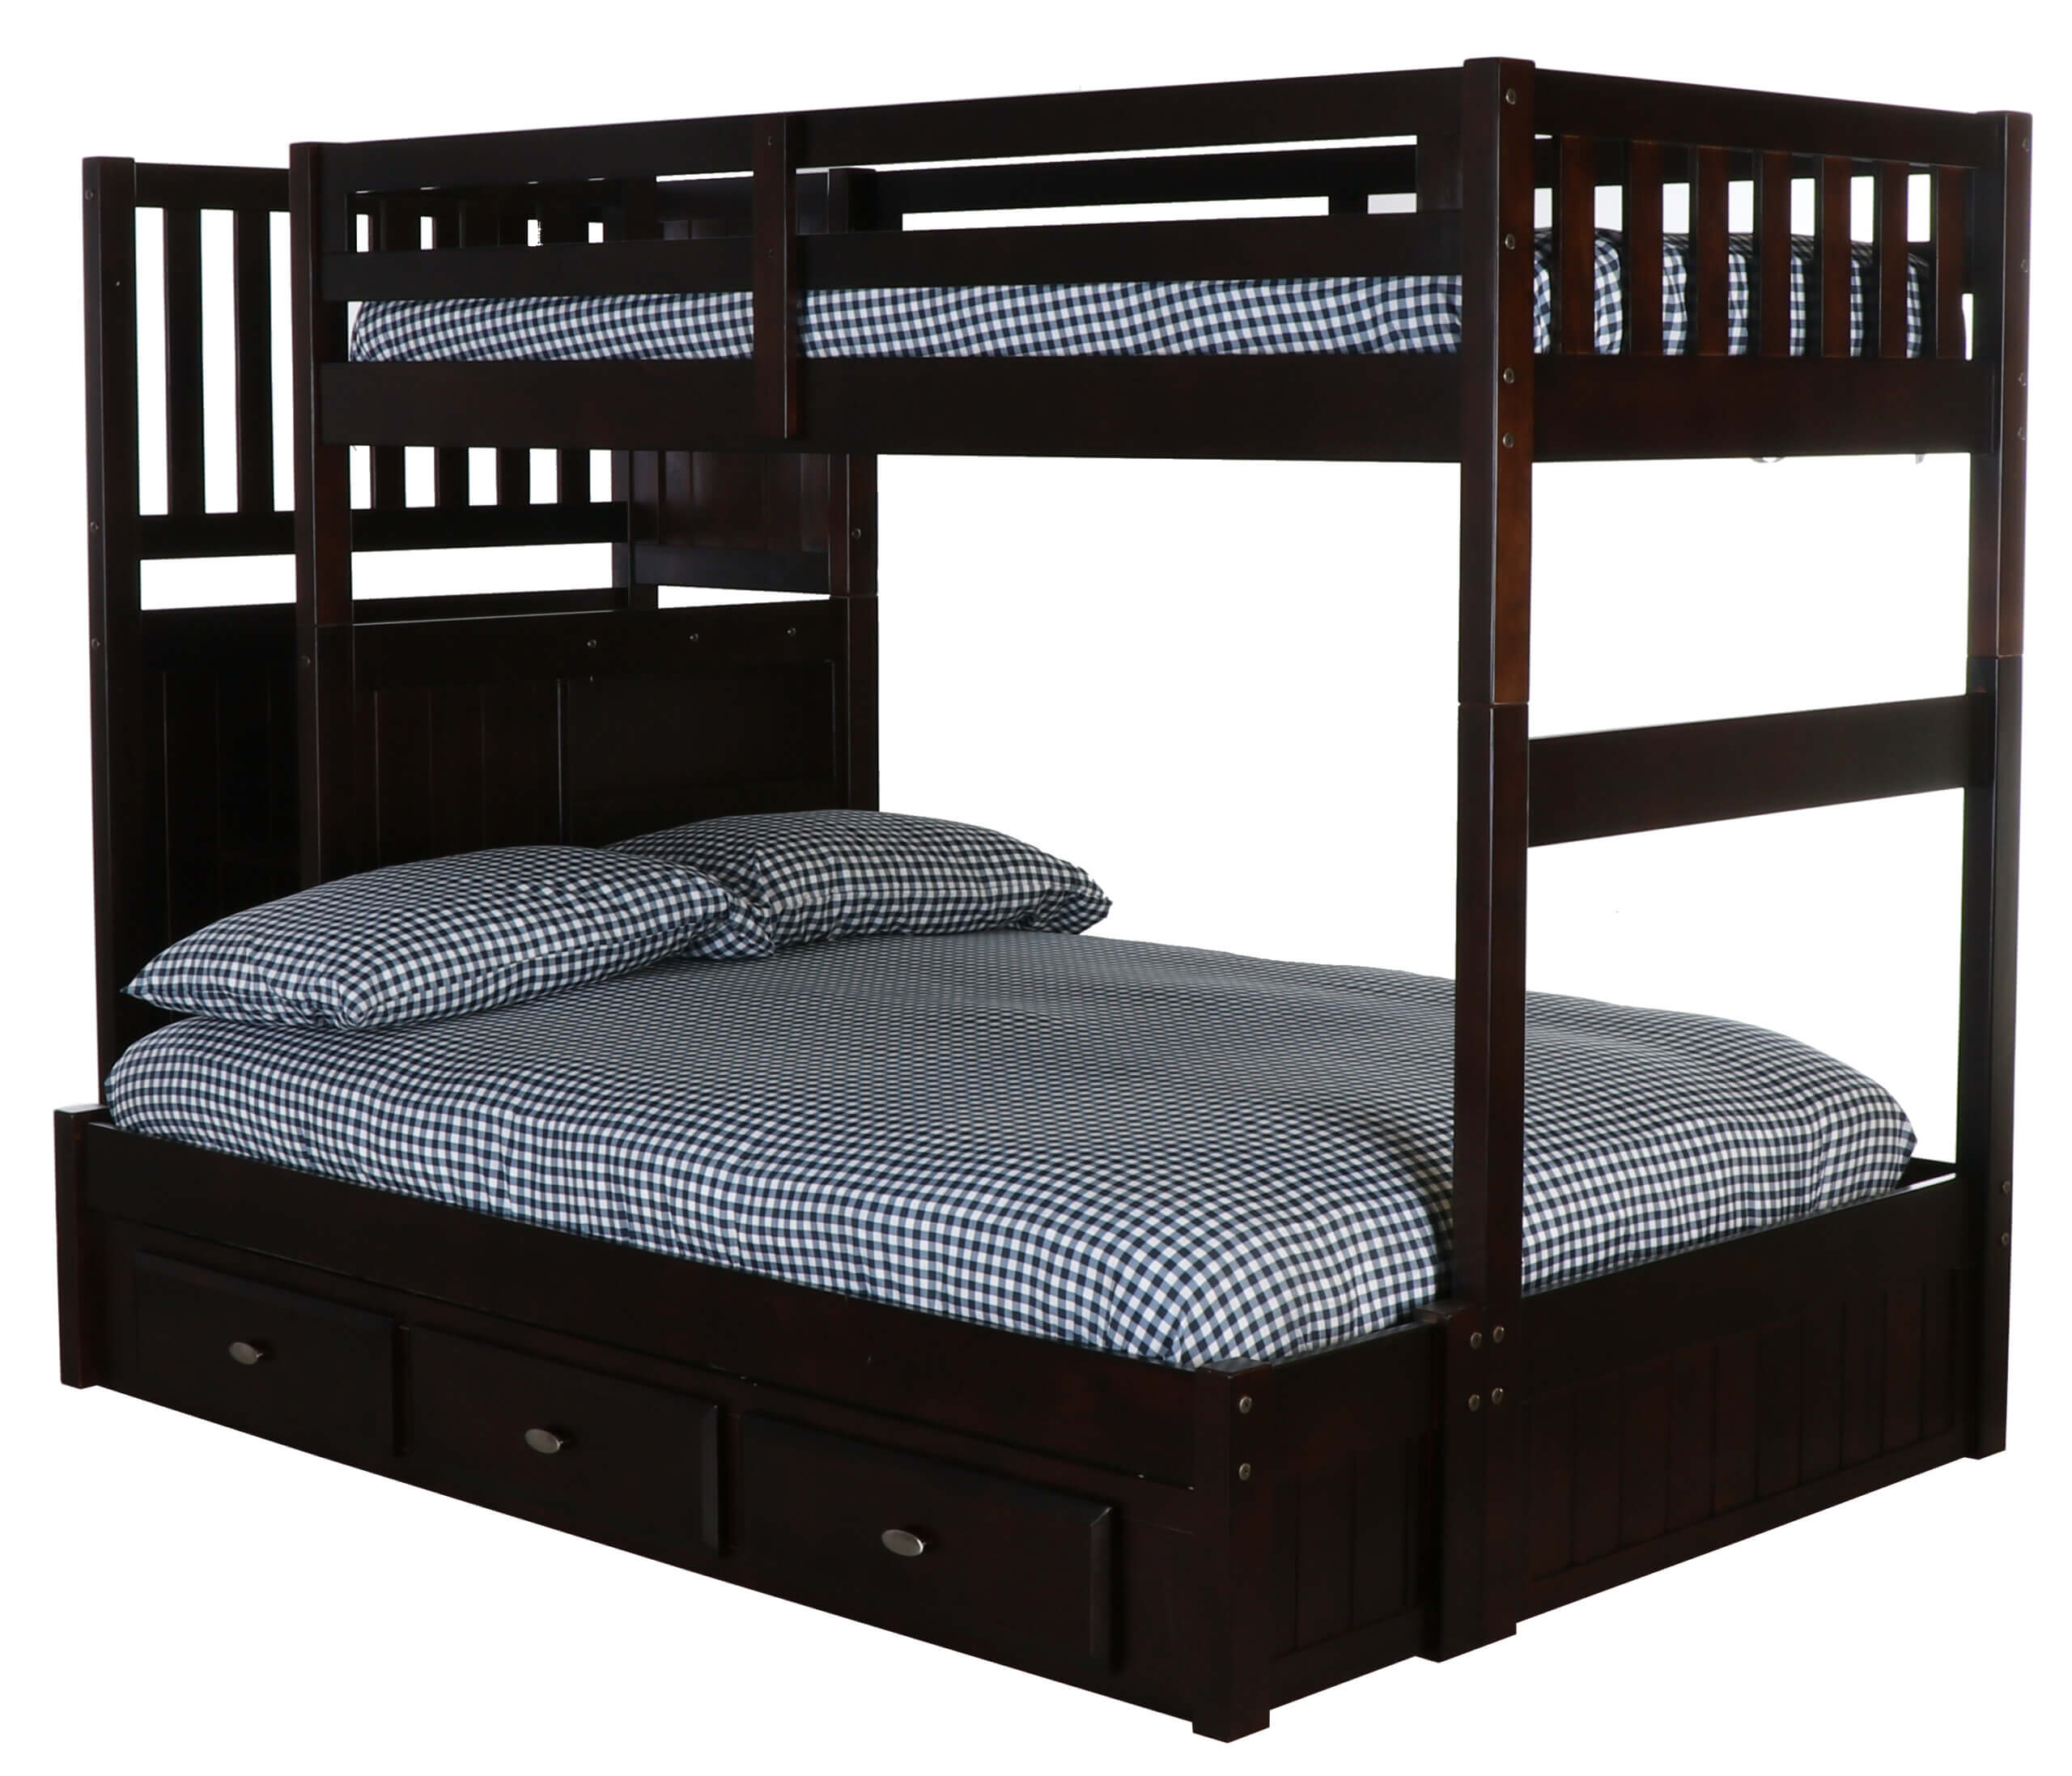 Espresso Staircase Bunk Bed All, Twin Over Full Bunk Bed With Stairs And Dresser